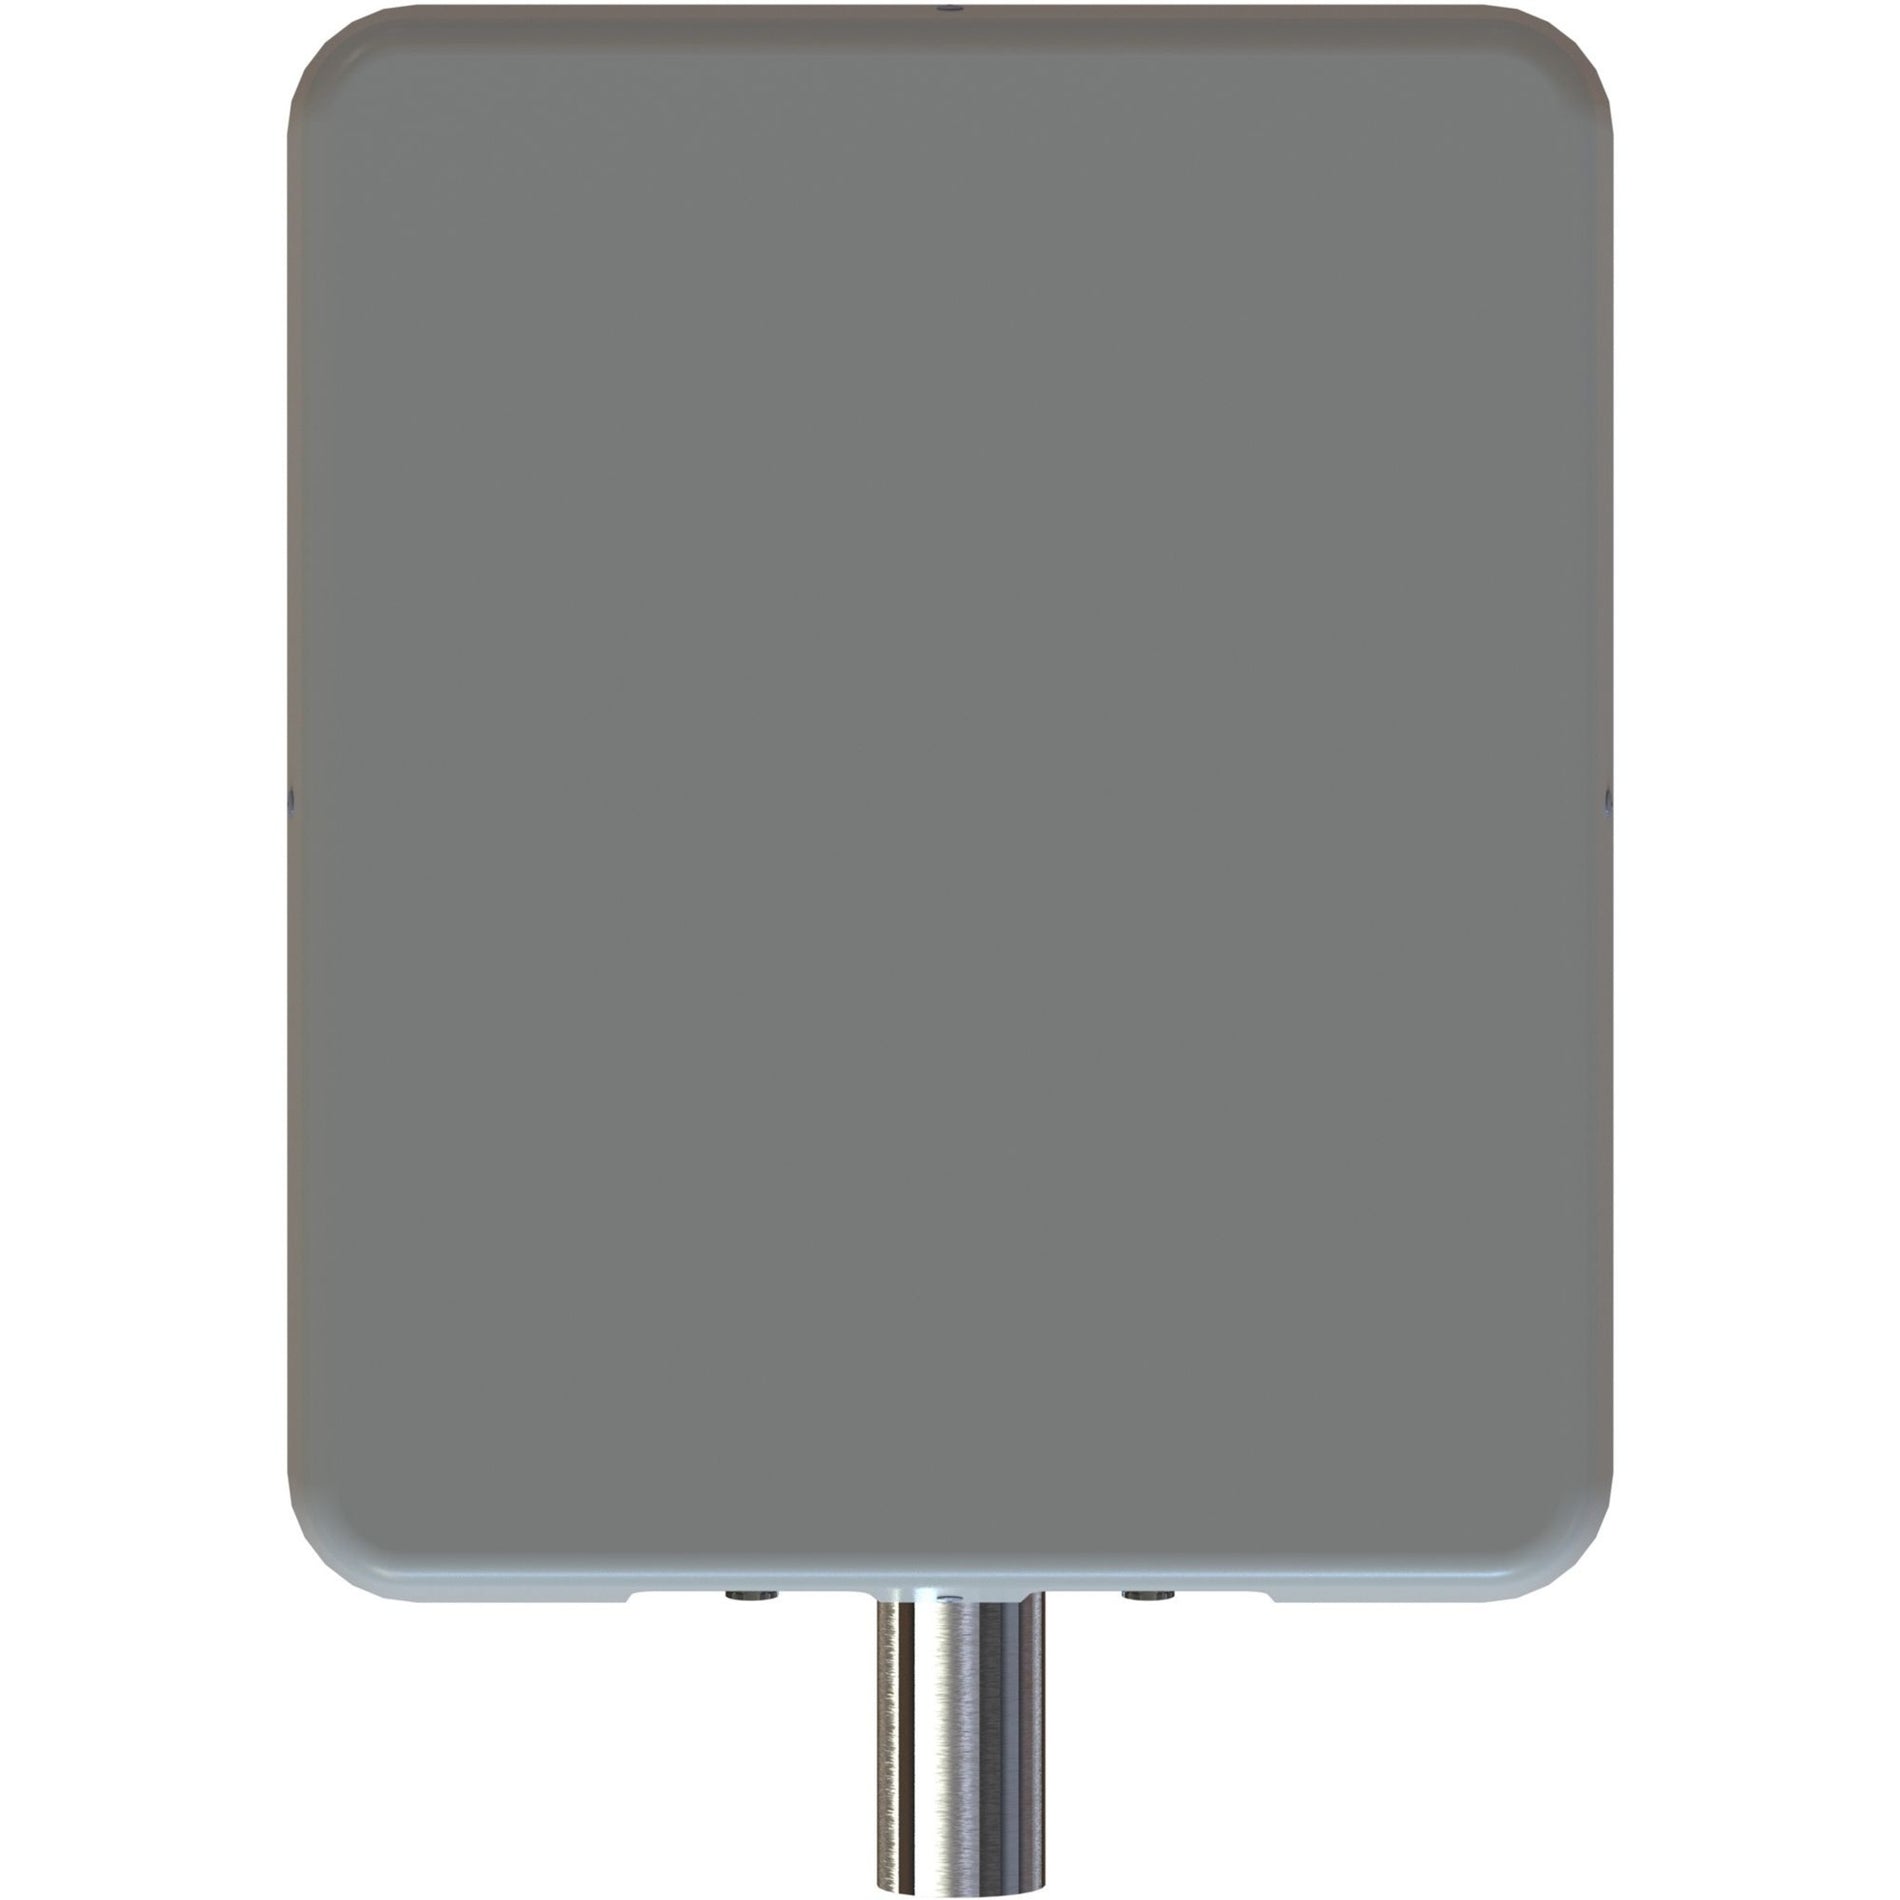 Parsec PTAGD2L-NF Great Dane Series - Roof Mount Omnidirectional Antenna, TAA Compliant, N-Type Connector